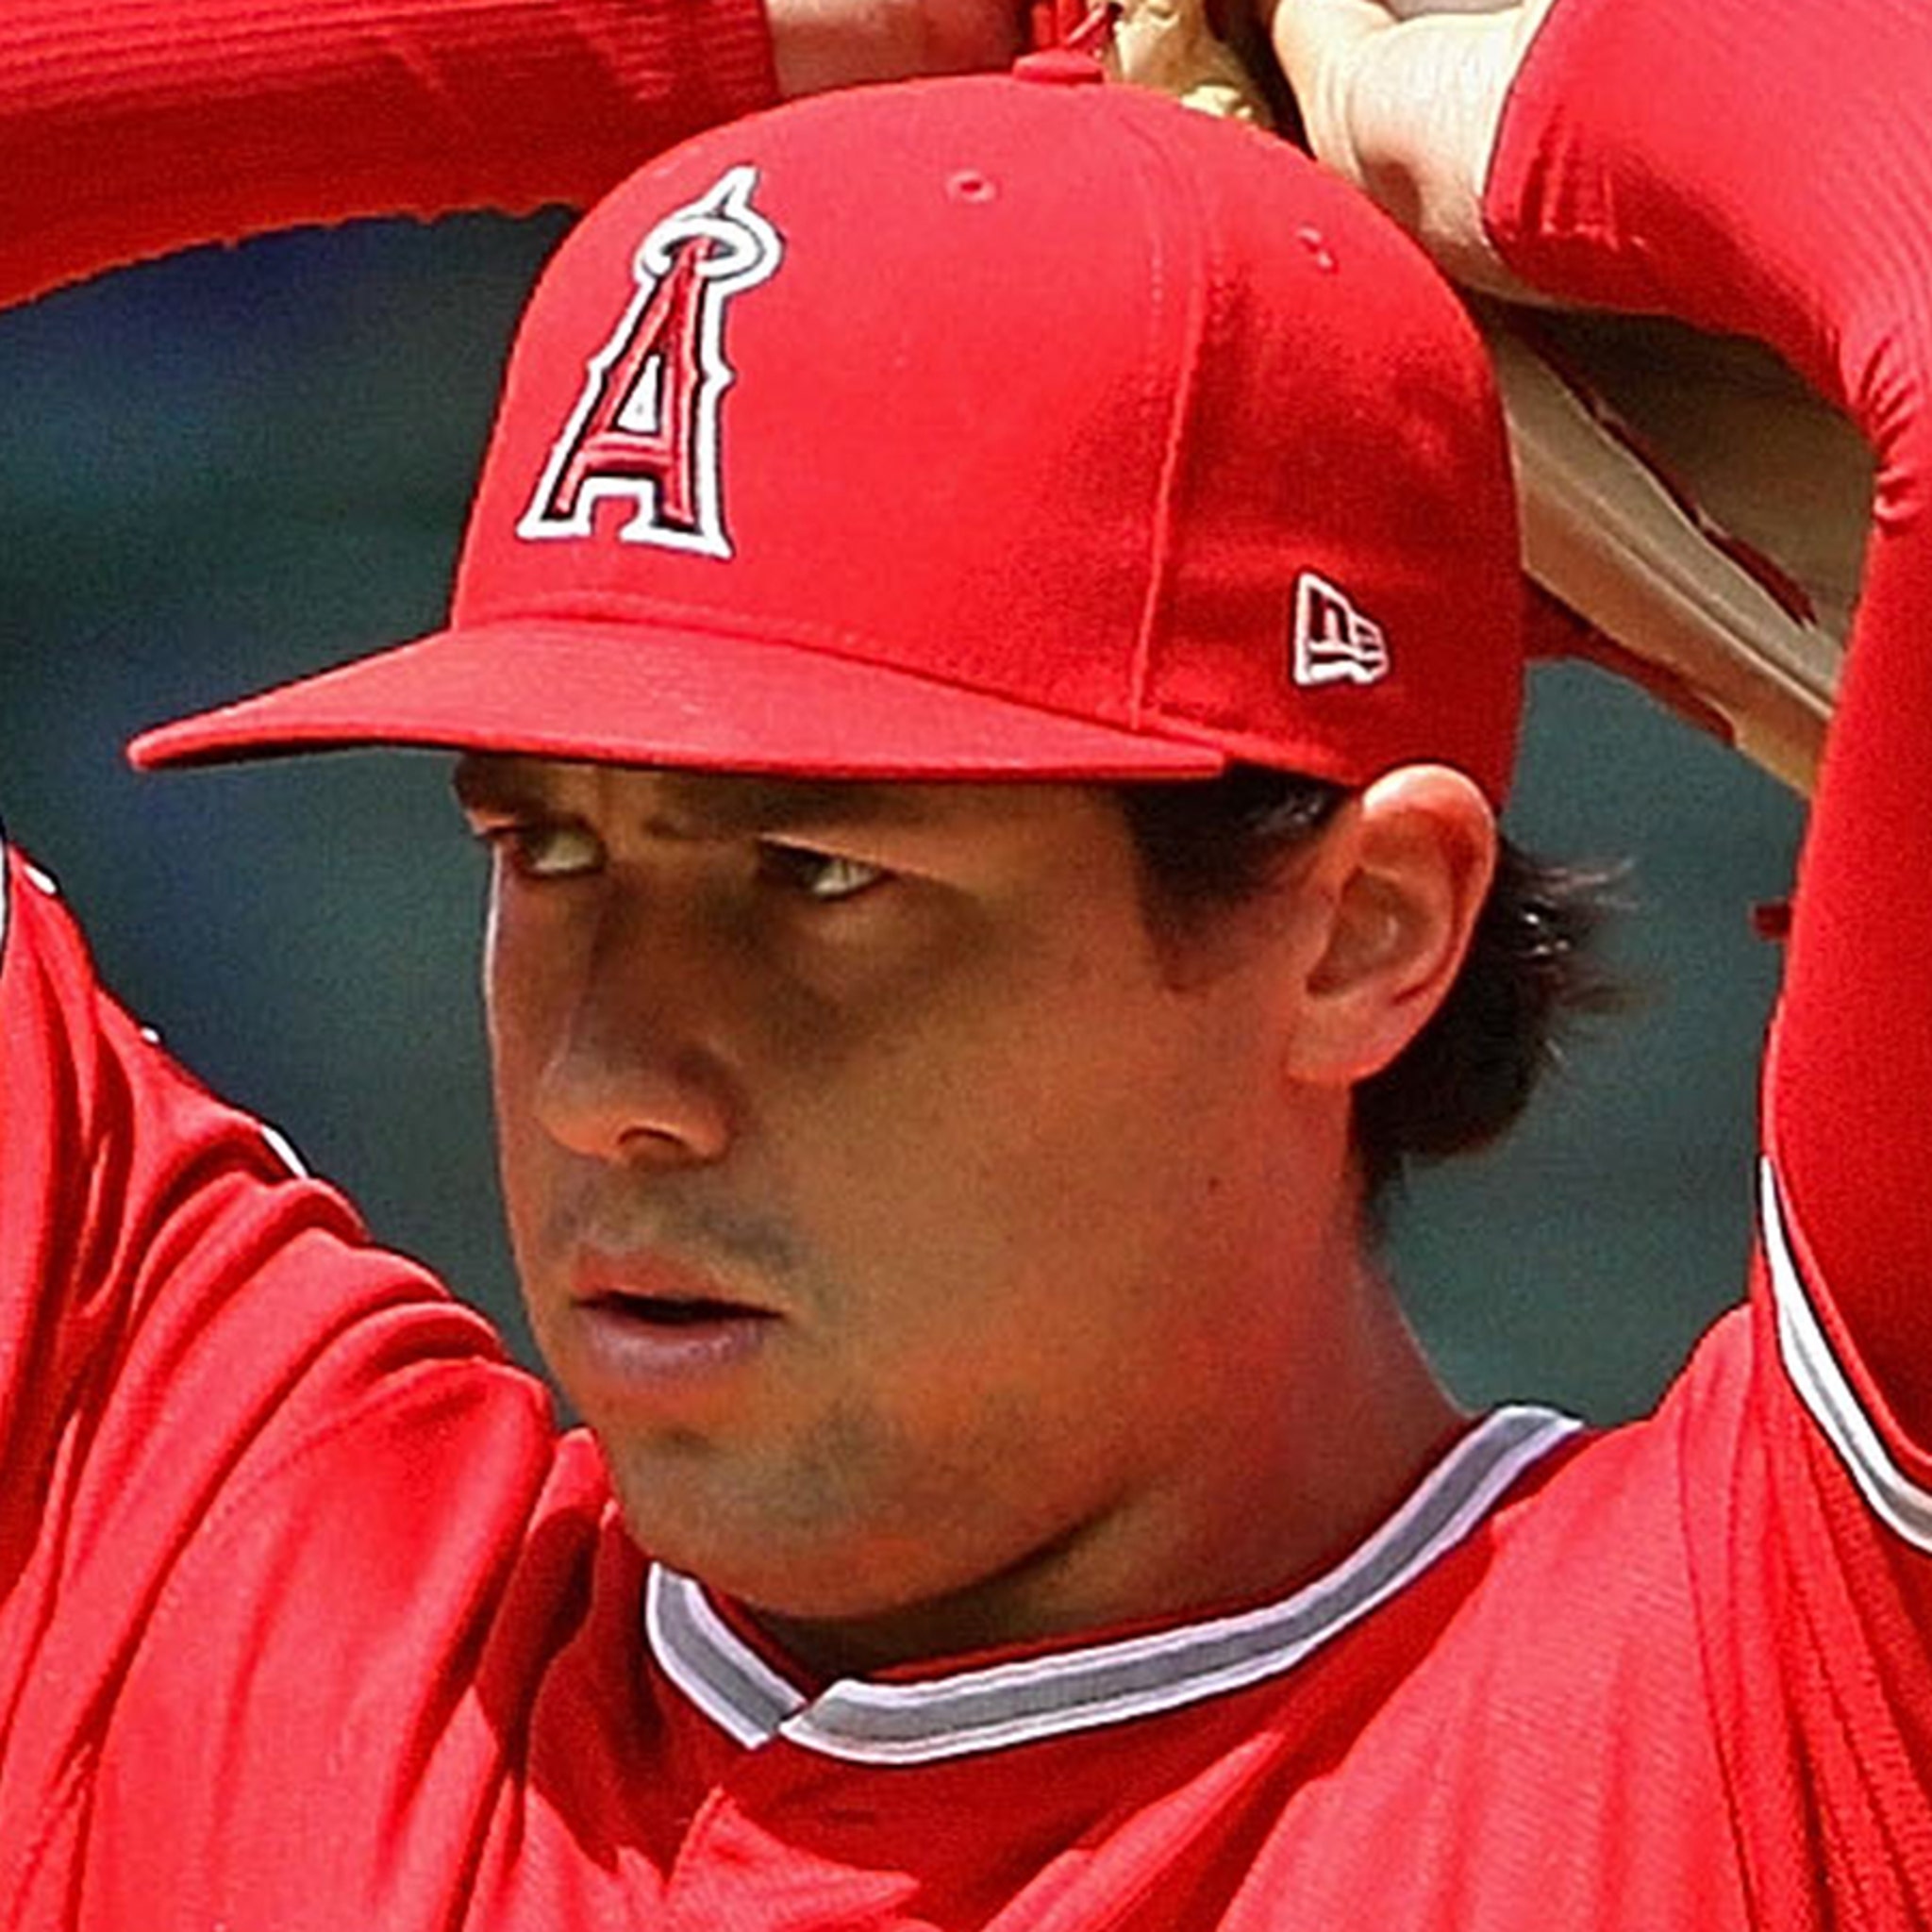 Drugs And Alcohol Led To Death of Angels Pitcher Tyler Skaggs : NPR